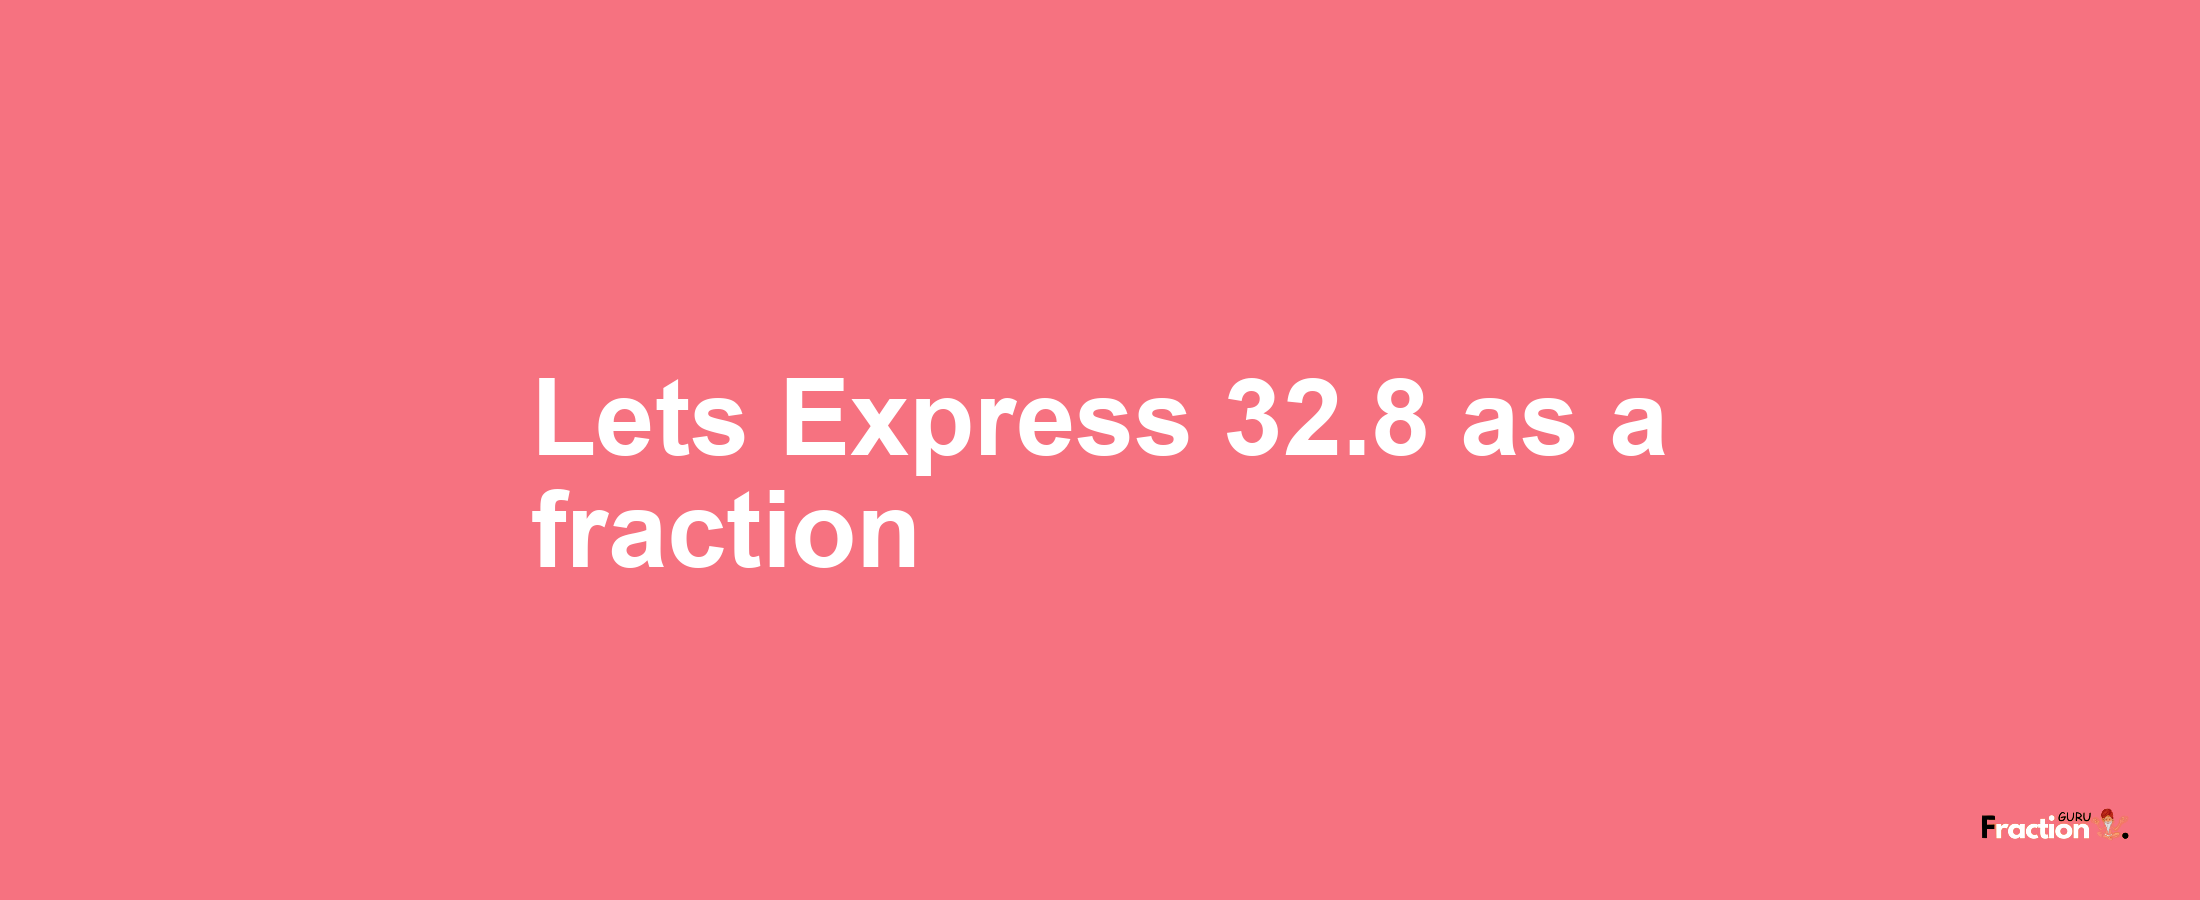 Lets Express 32.8 as afraction